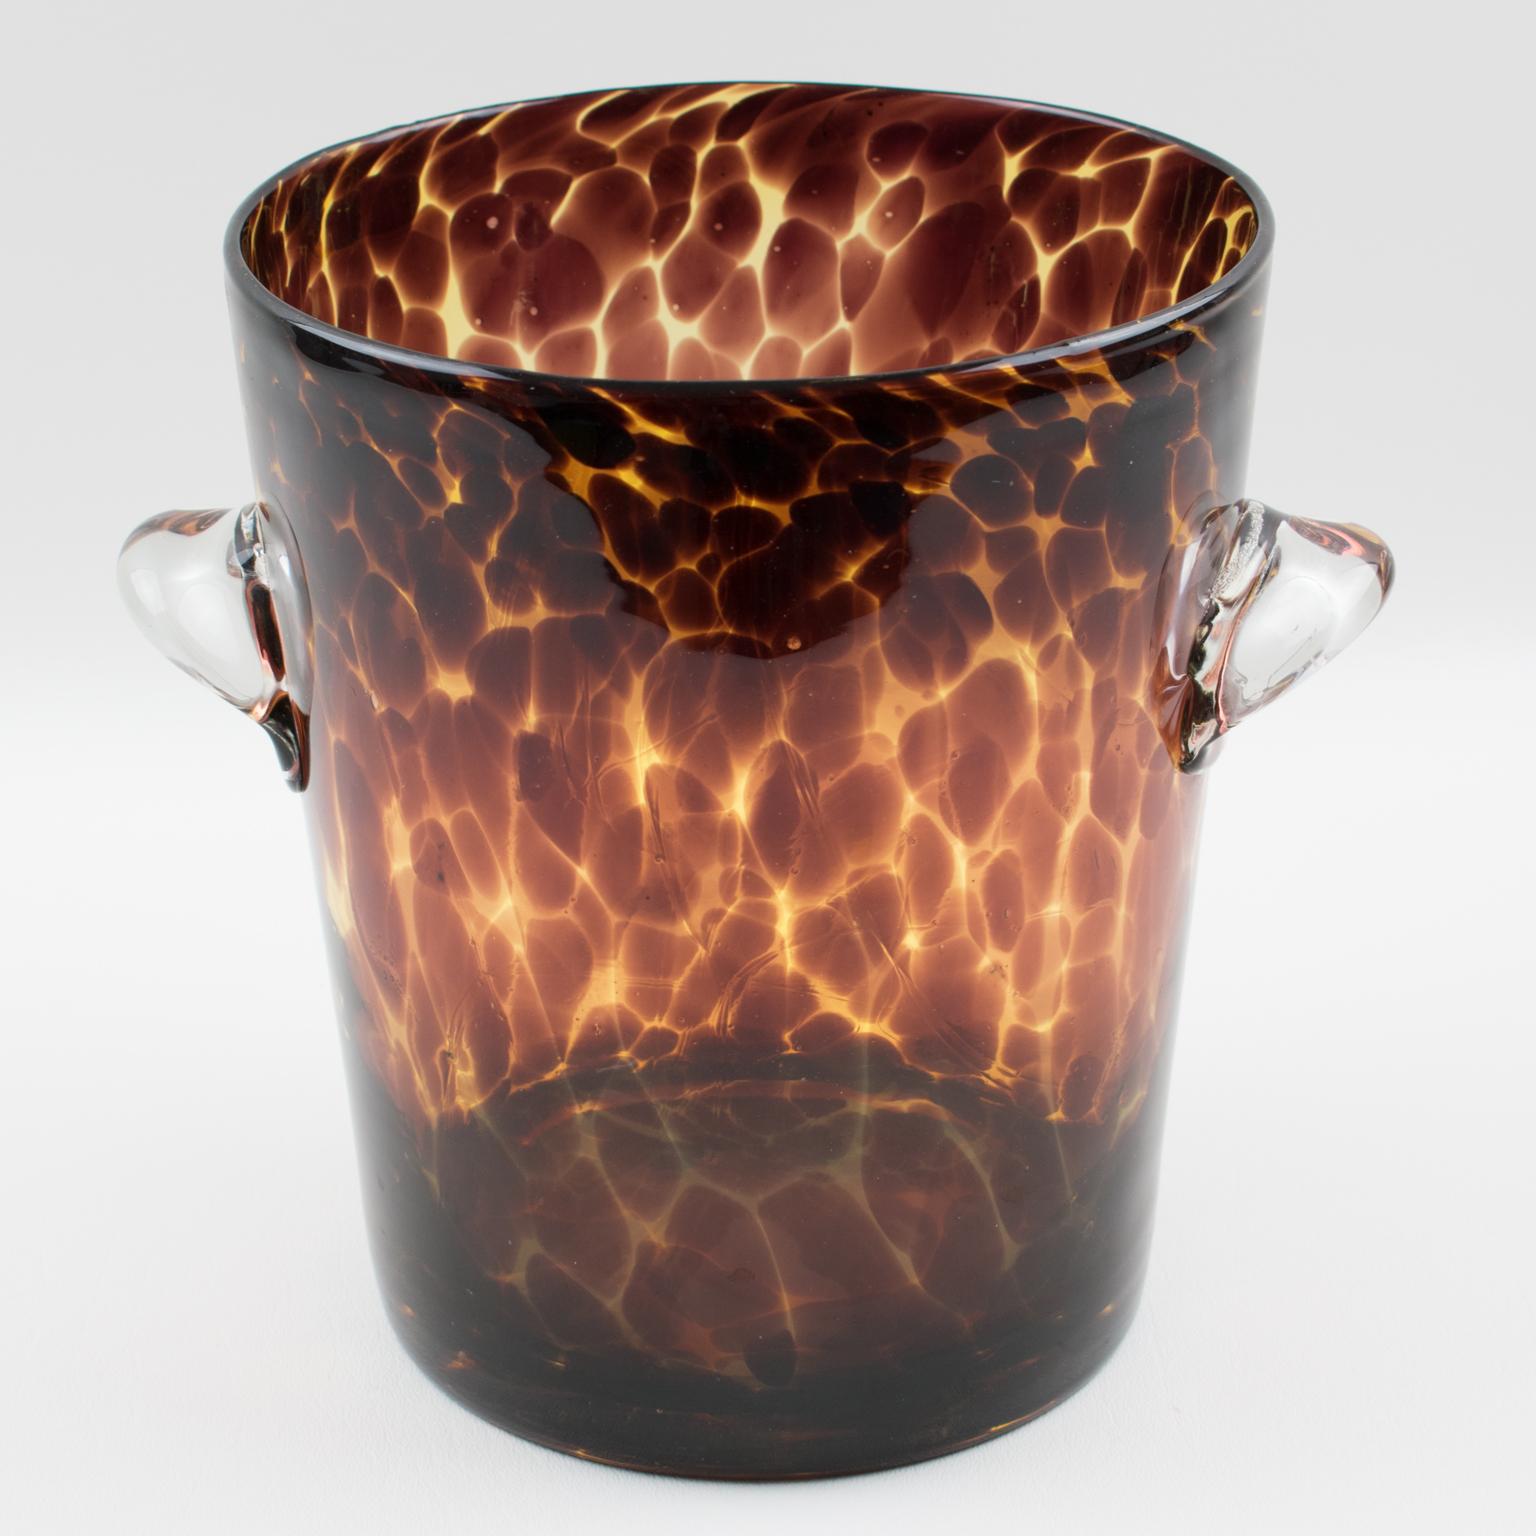 1960s French designer Christian Dior glass ice bucket or champagne cooler or wine cooler, mouth-blown in Empoli, Italy. From the Dior Home collection, exclusive tortoiseshell color flowing pattern. Lovely clear glass handles on the